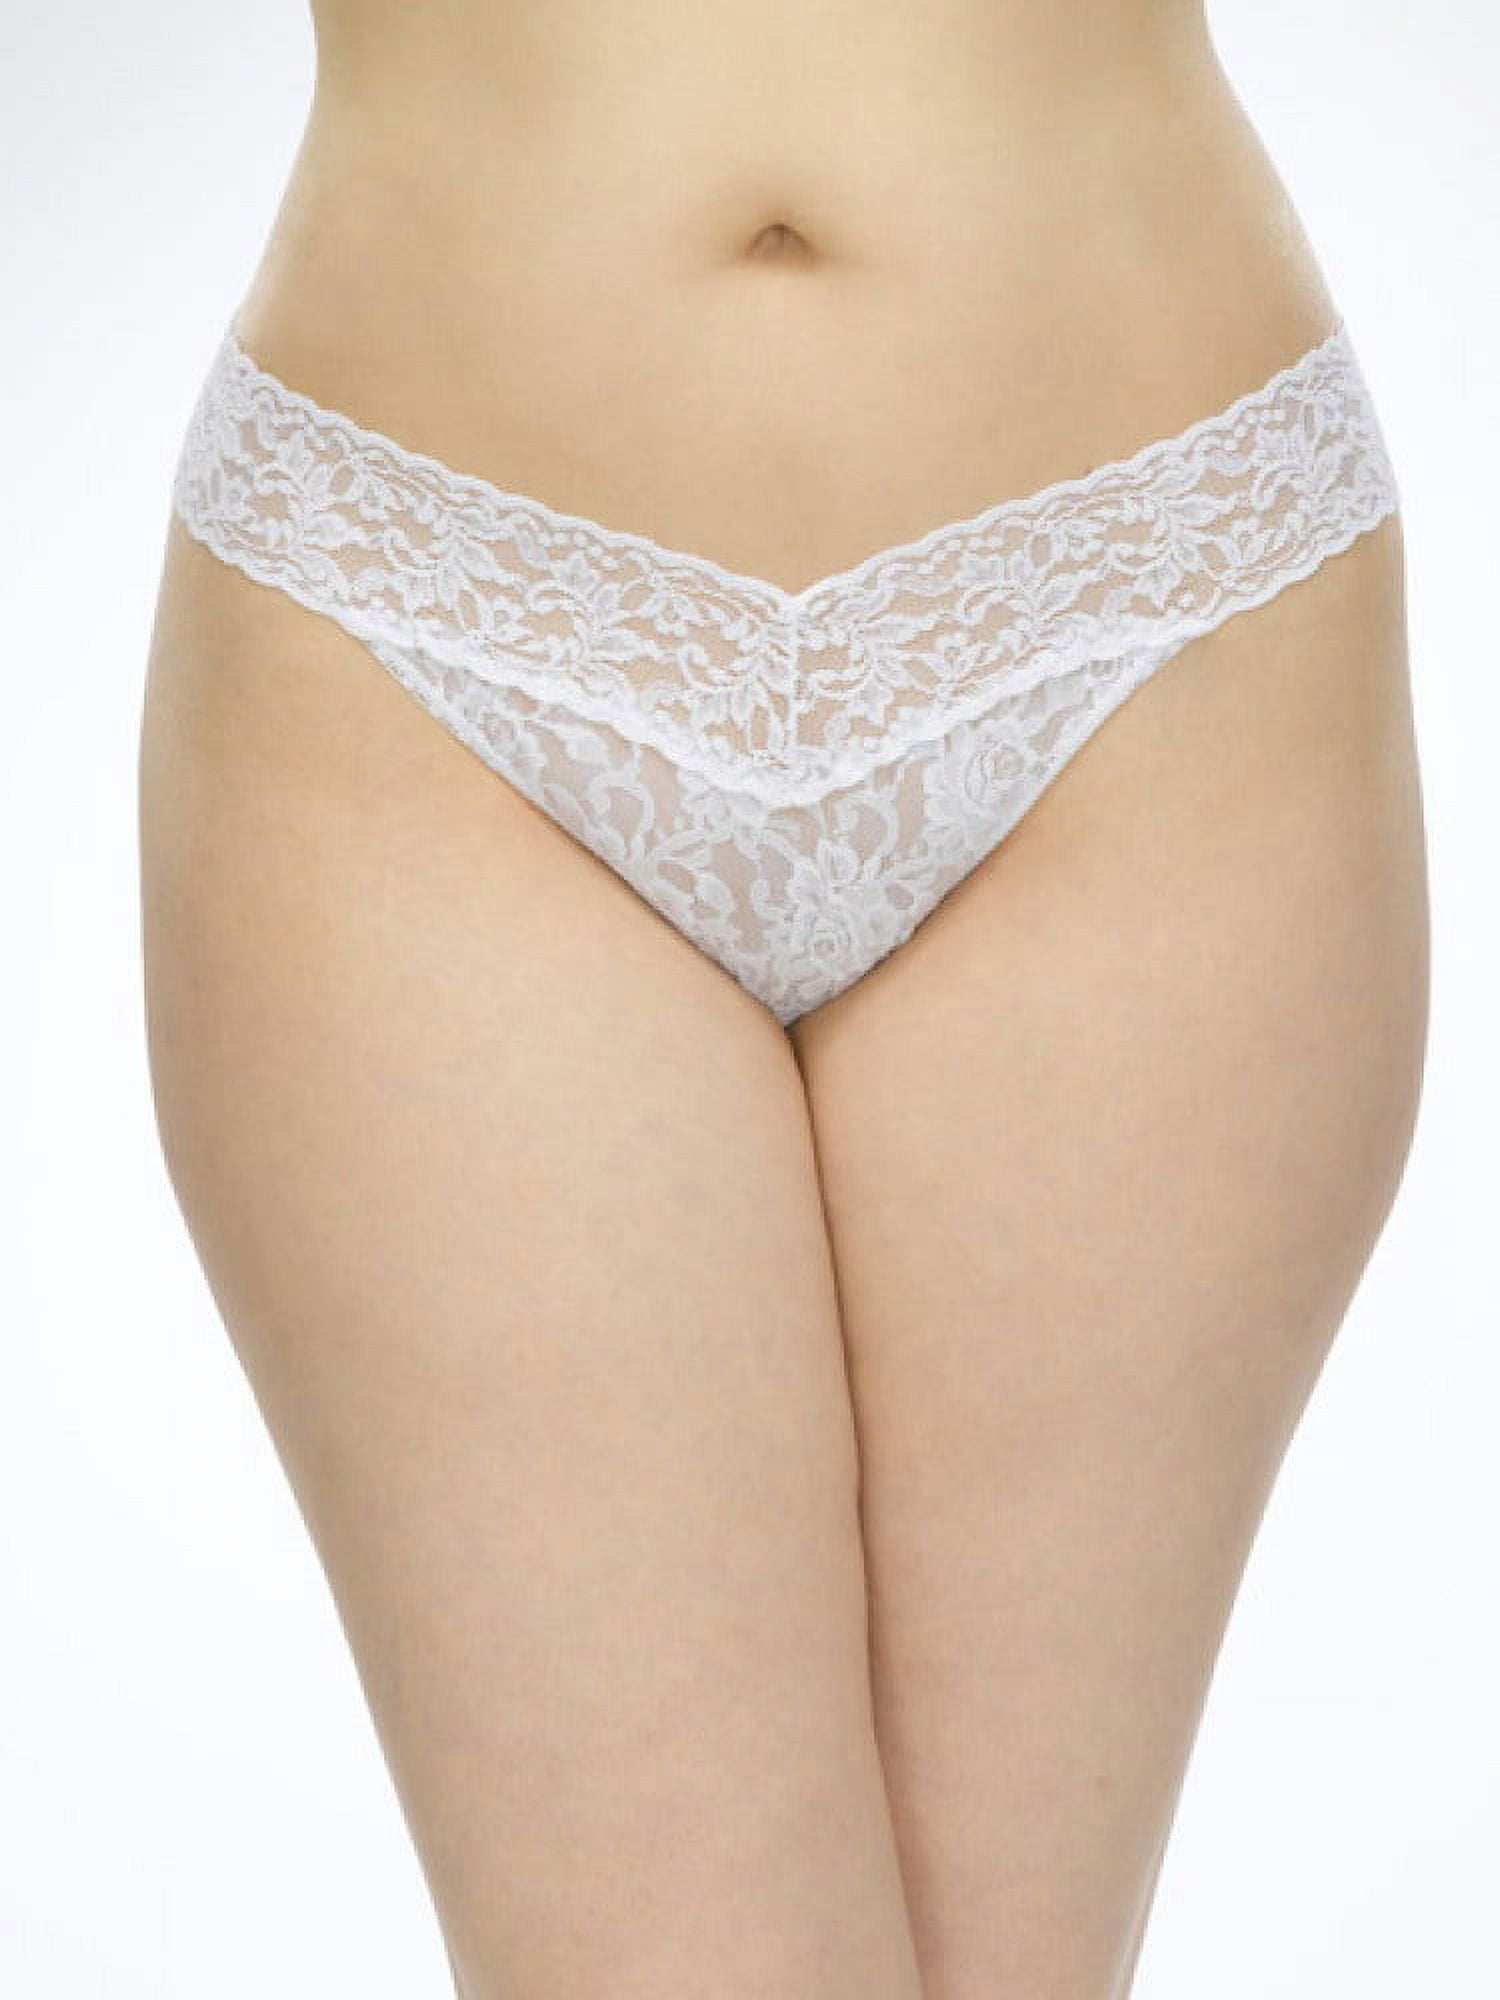 Shop White Lace Thongs Plus Size with great discounts and prices